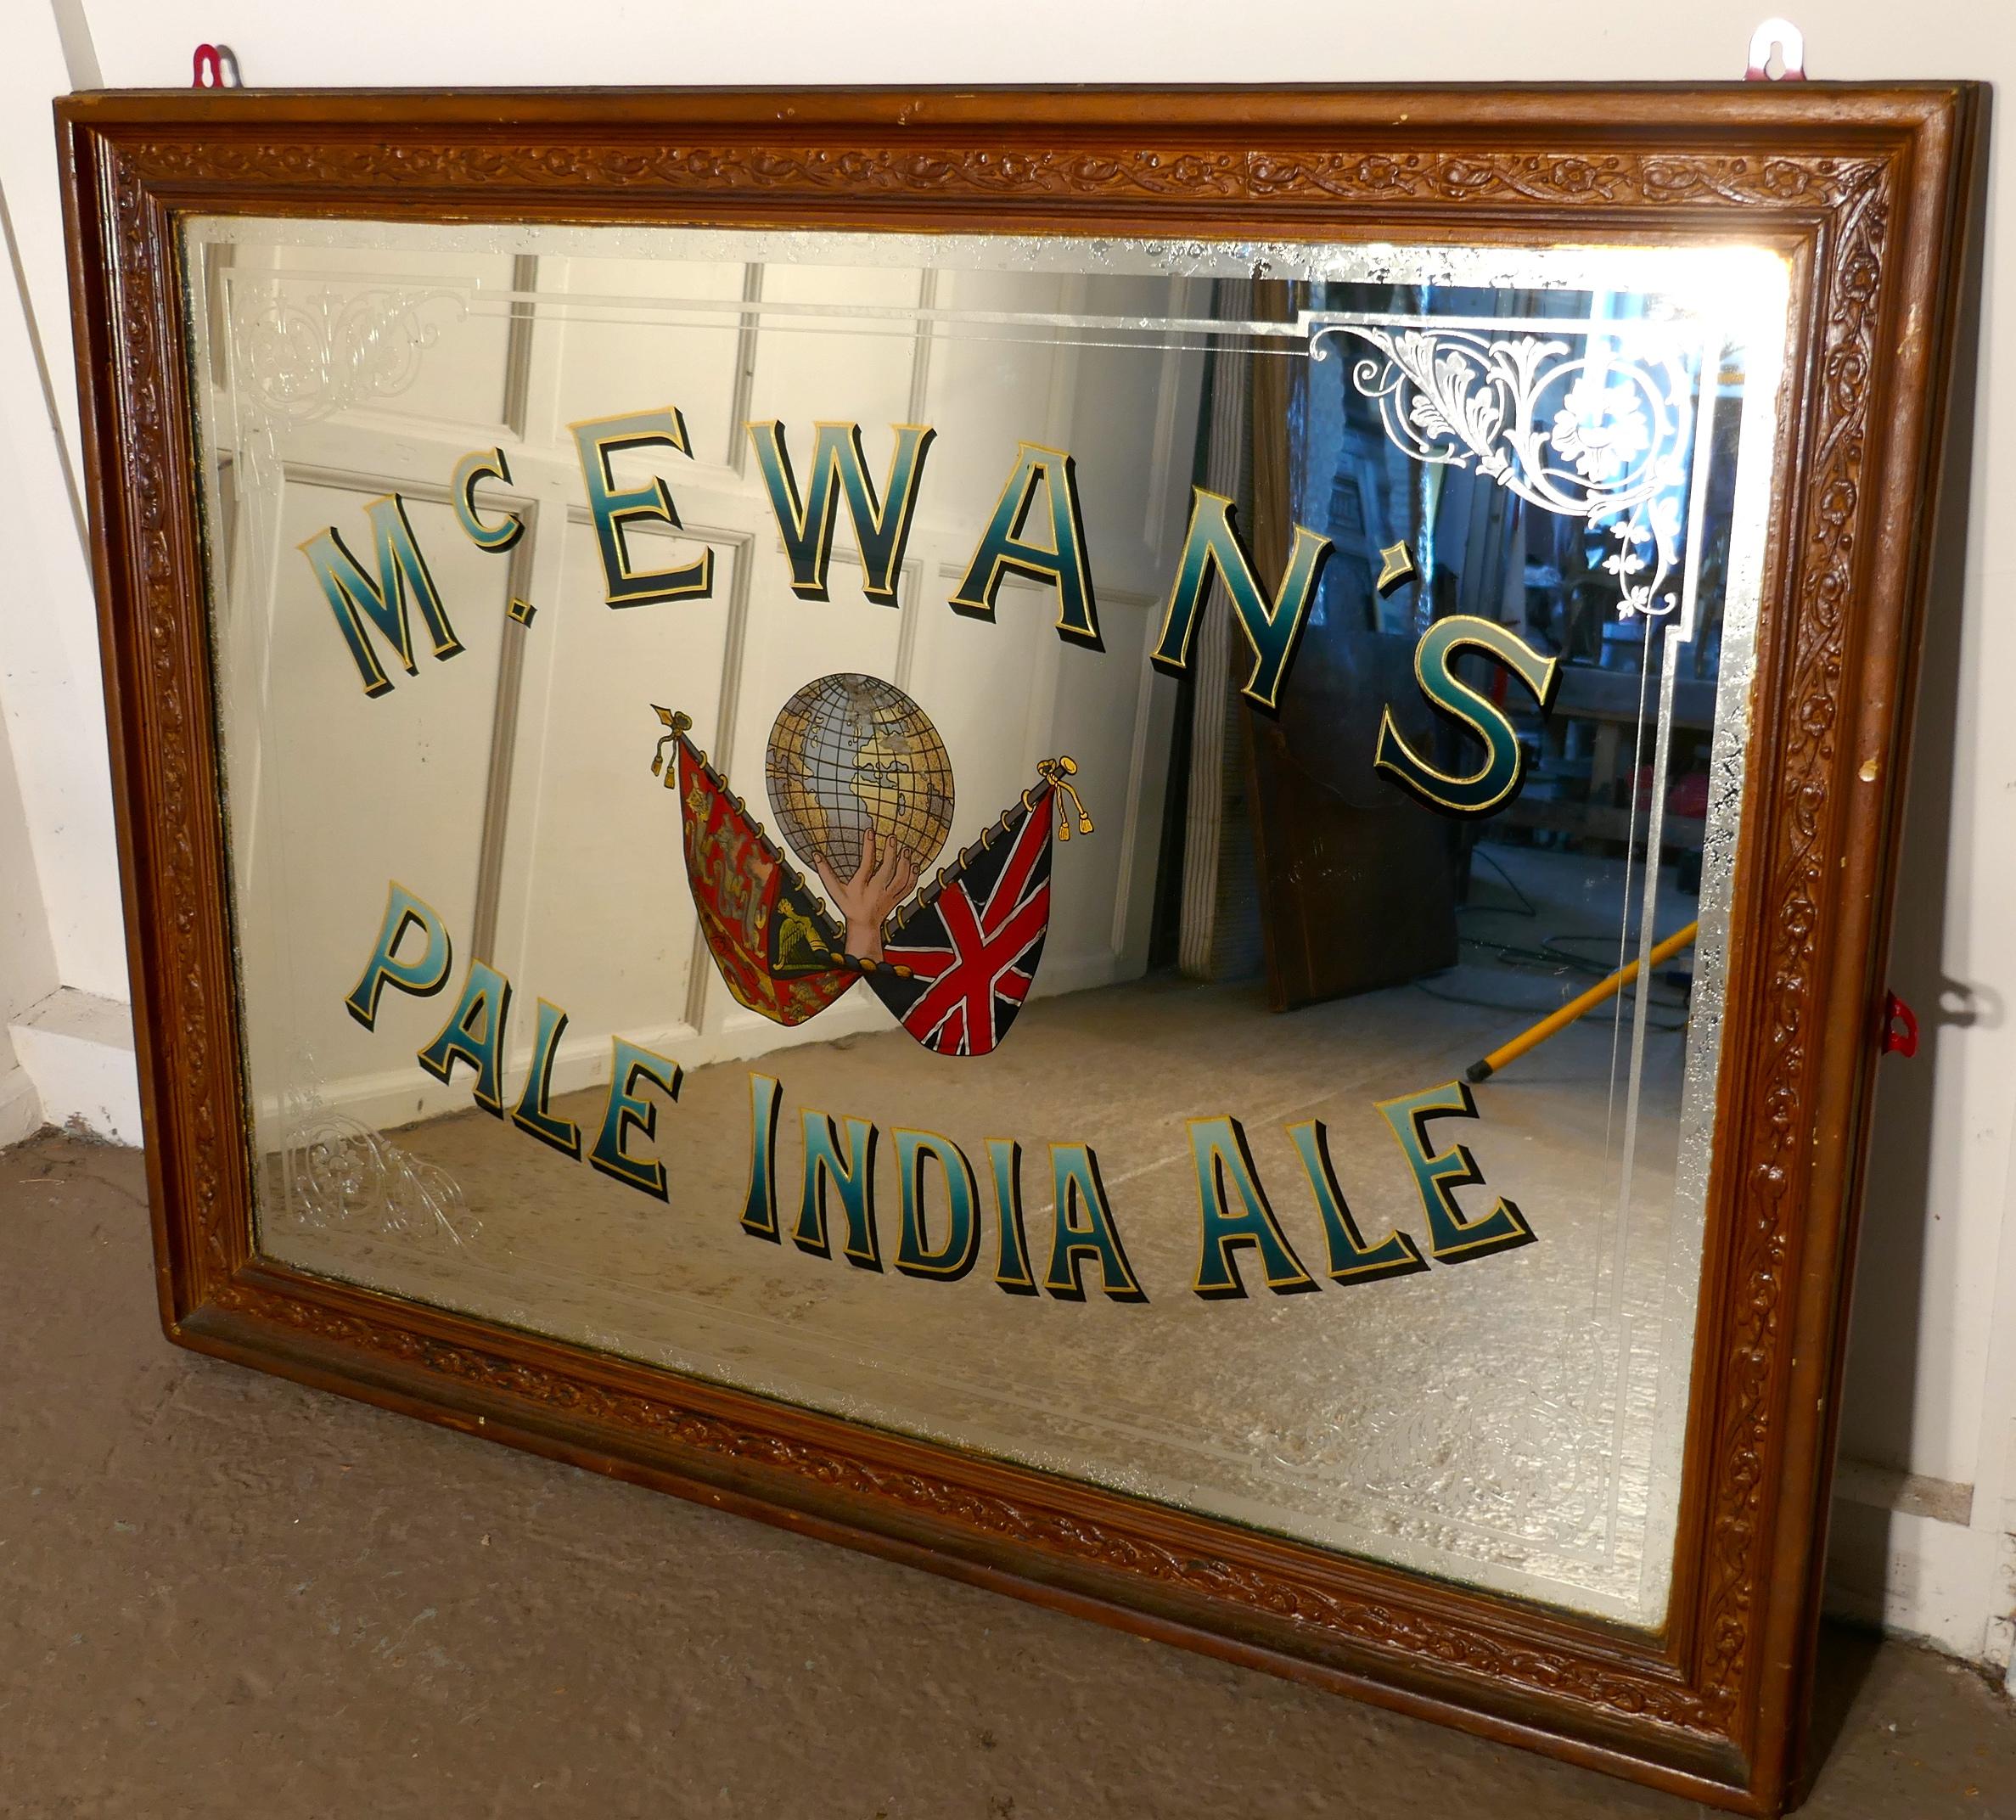 A large Mc Ewan’s Pale India Ale advertising mirror, pub mirror for Mc Ewans’s

This is wonderful pictorial advertising mirror, advertising Mc Ewan’s Pale India Ale
The mirror has a colorful picture the Iconic Logo at its centre of the Royal